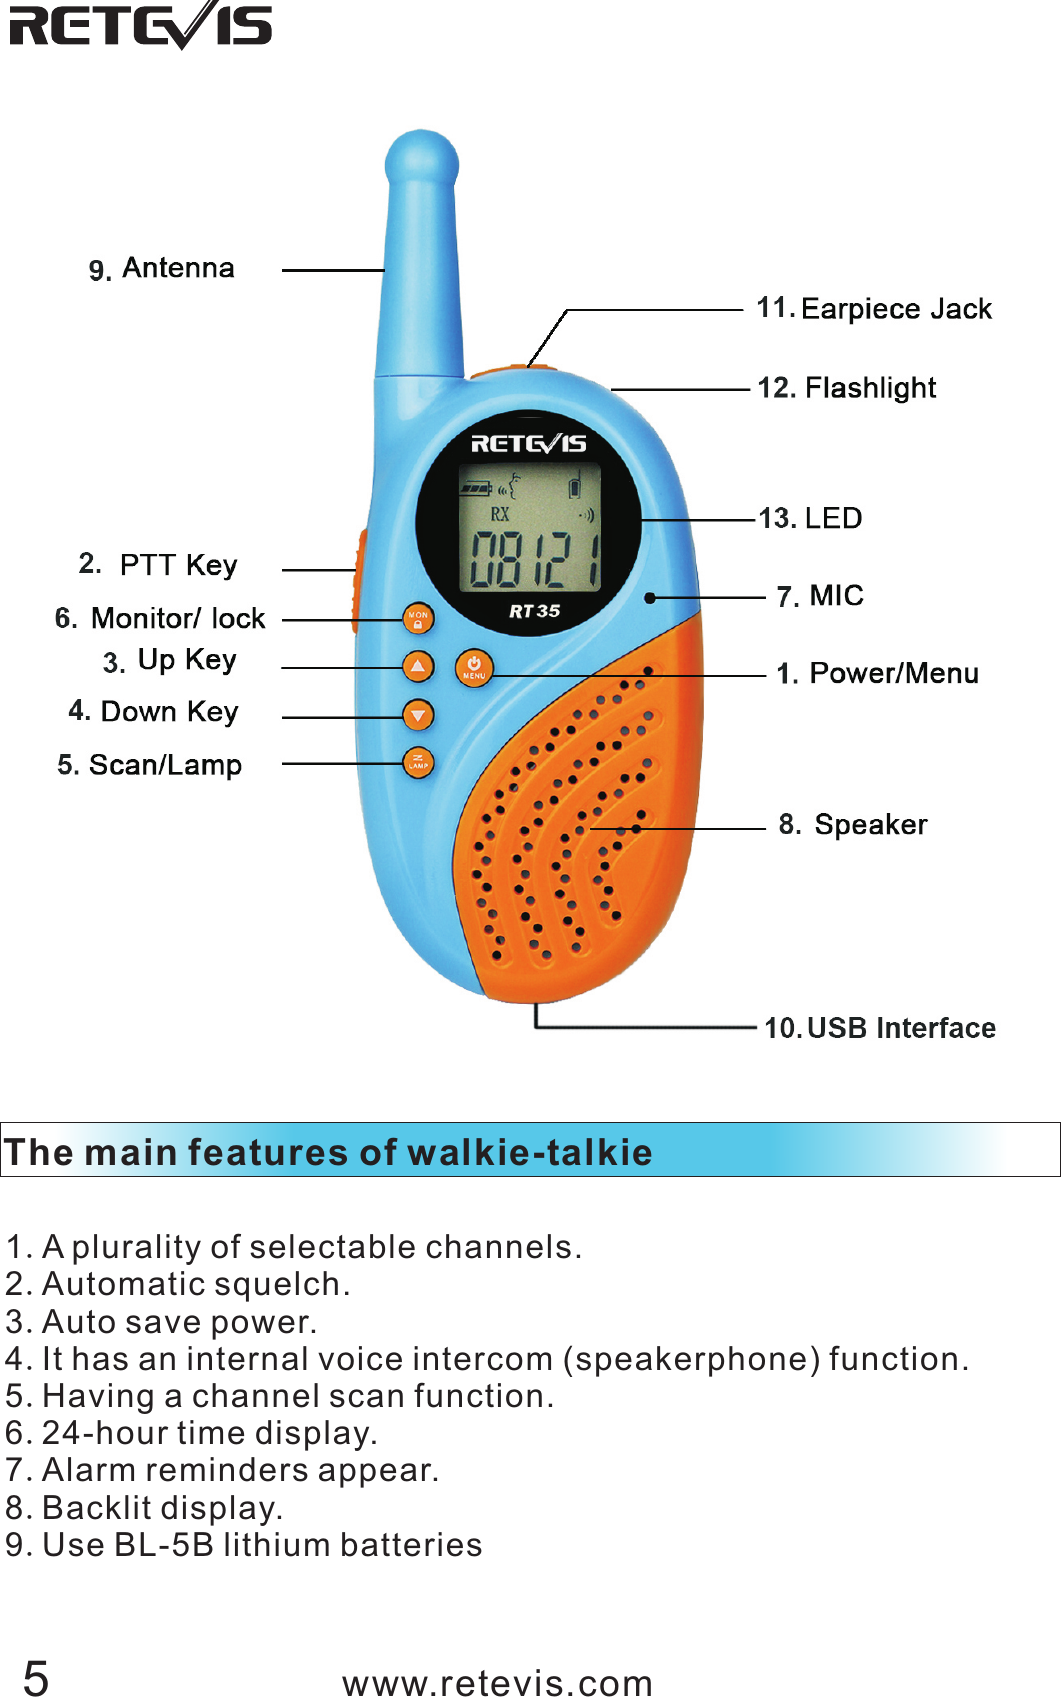 The main features of walkie-talkie  1.A plurality of selectable channels.2.Automatic squelch.3.Auto save power.4.It has an internal voice intercom (speakerphone) function.5.Having a channel scan function.6.24-hour time display.7.Alarm reminders appear.8.Backlit display.9.Use BL-5B lithium batterieswww.retevis.com5